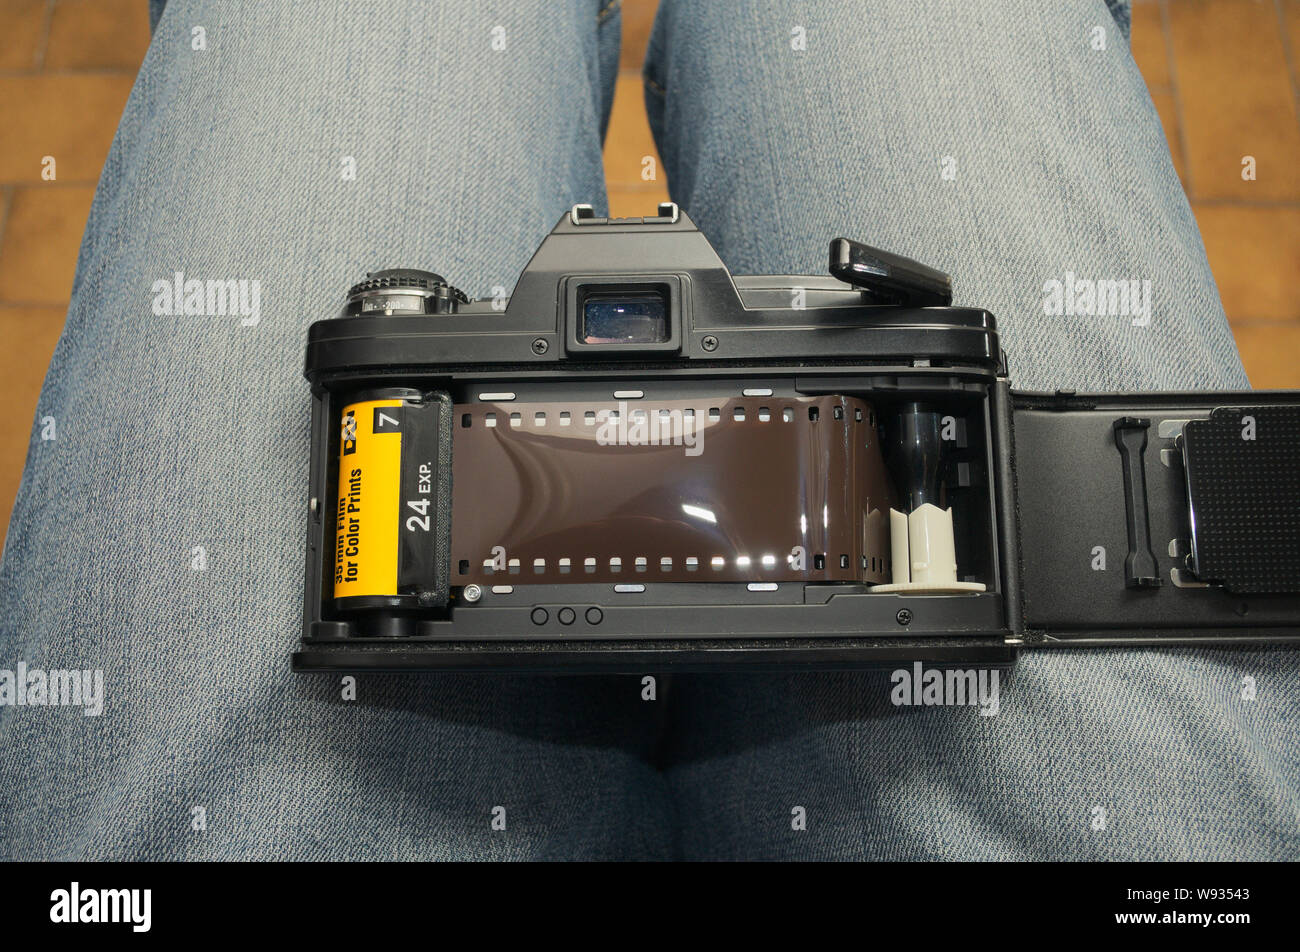 An SRL film camera loaded with a 35mm film held on legs Stock Photo